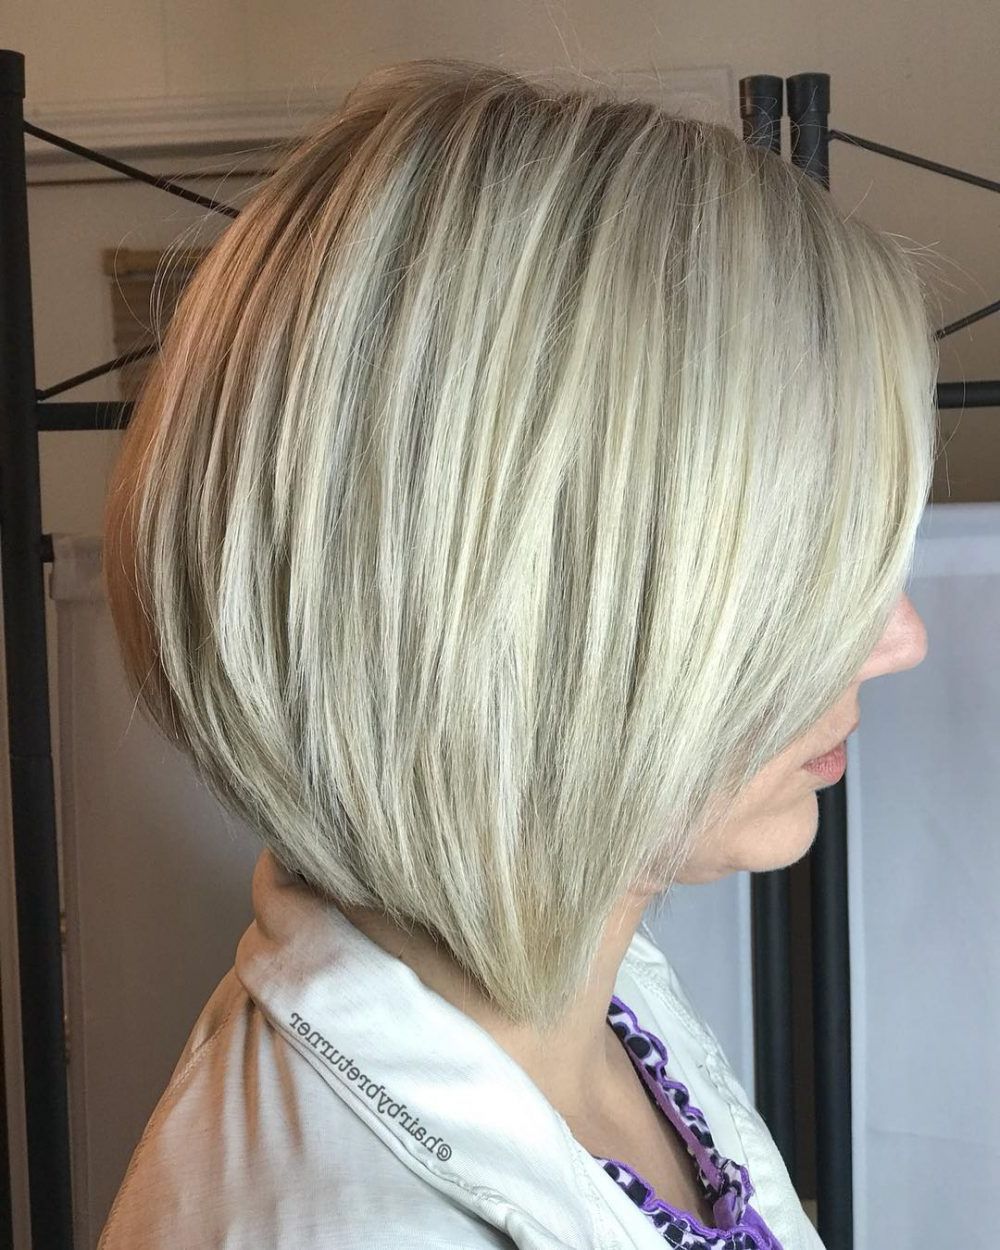 42 Sexiest Short Hairstyles For Women Over 40 In 2018 For Short Hairstyles For Women With Fine Hair Over  (View 6 of 25)